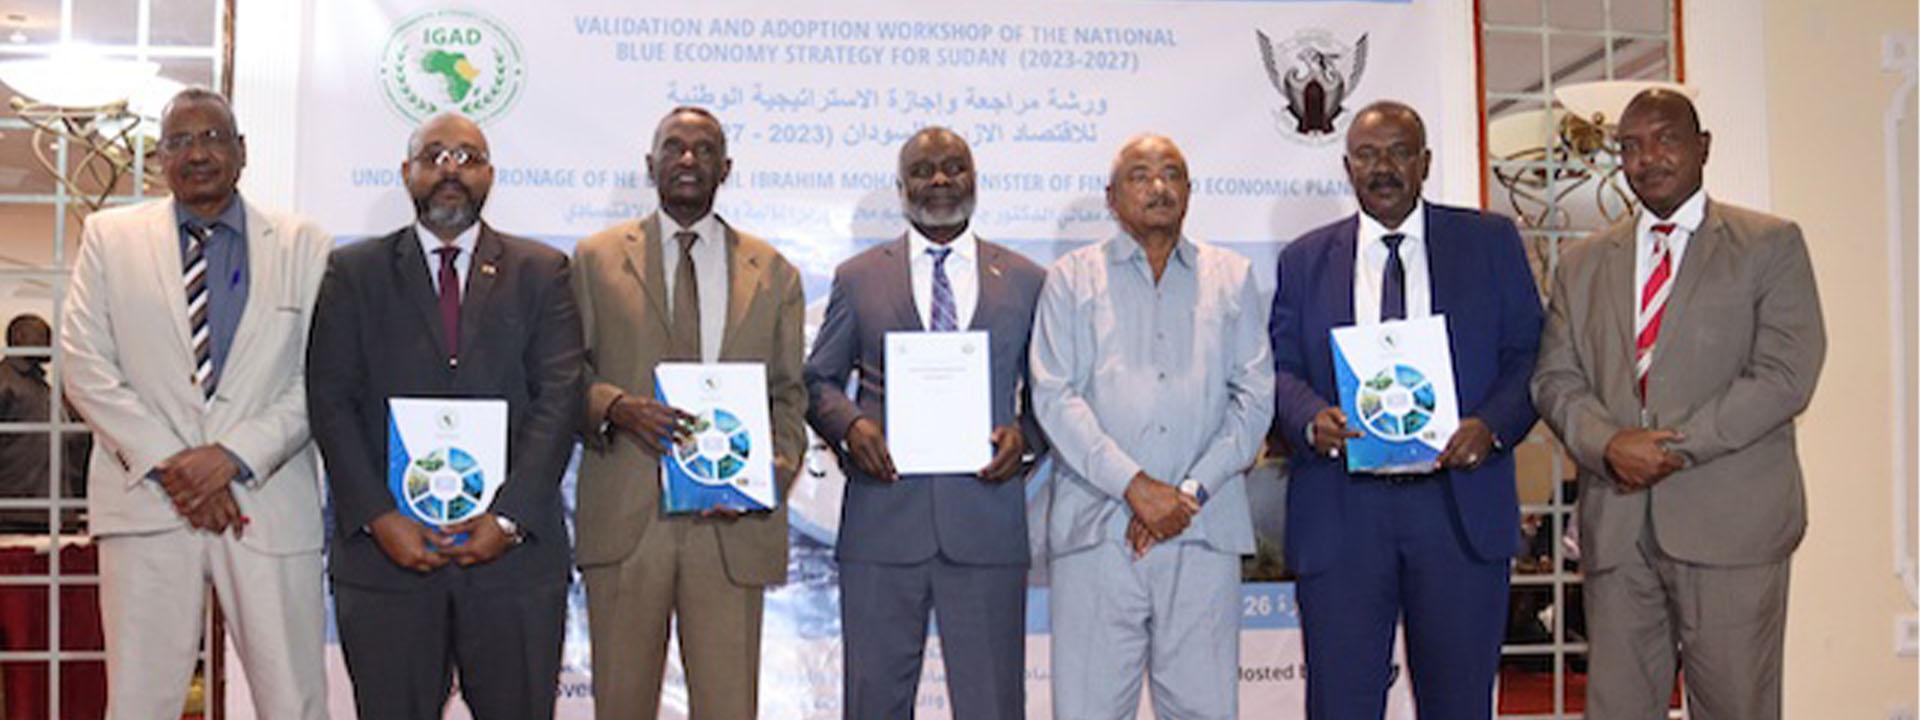 Approval of the National Blue Economy Strategy for Sudan for the Year (2023-2027)